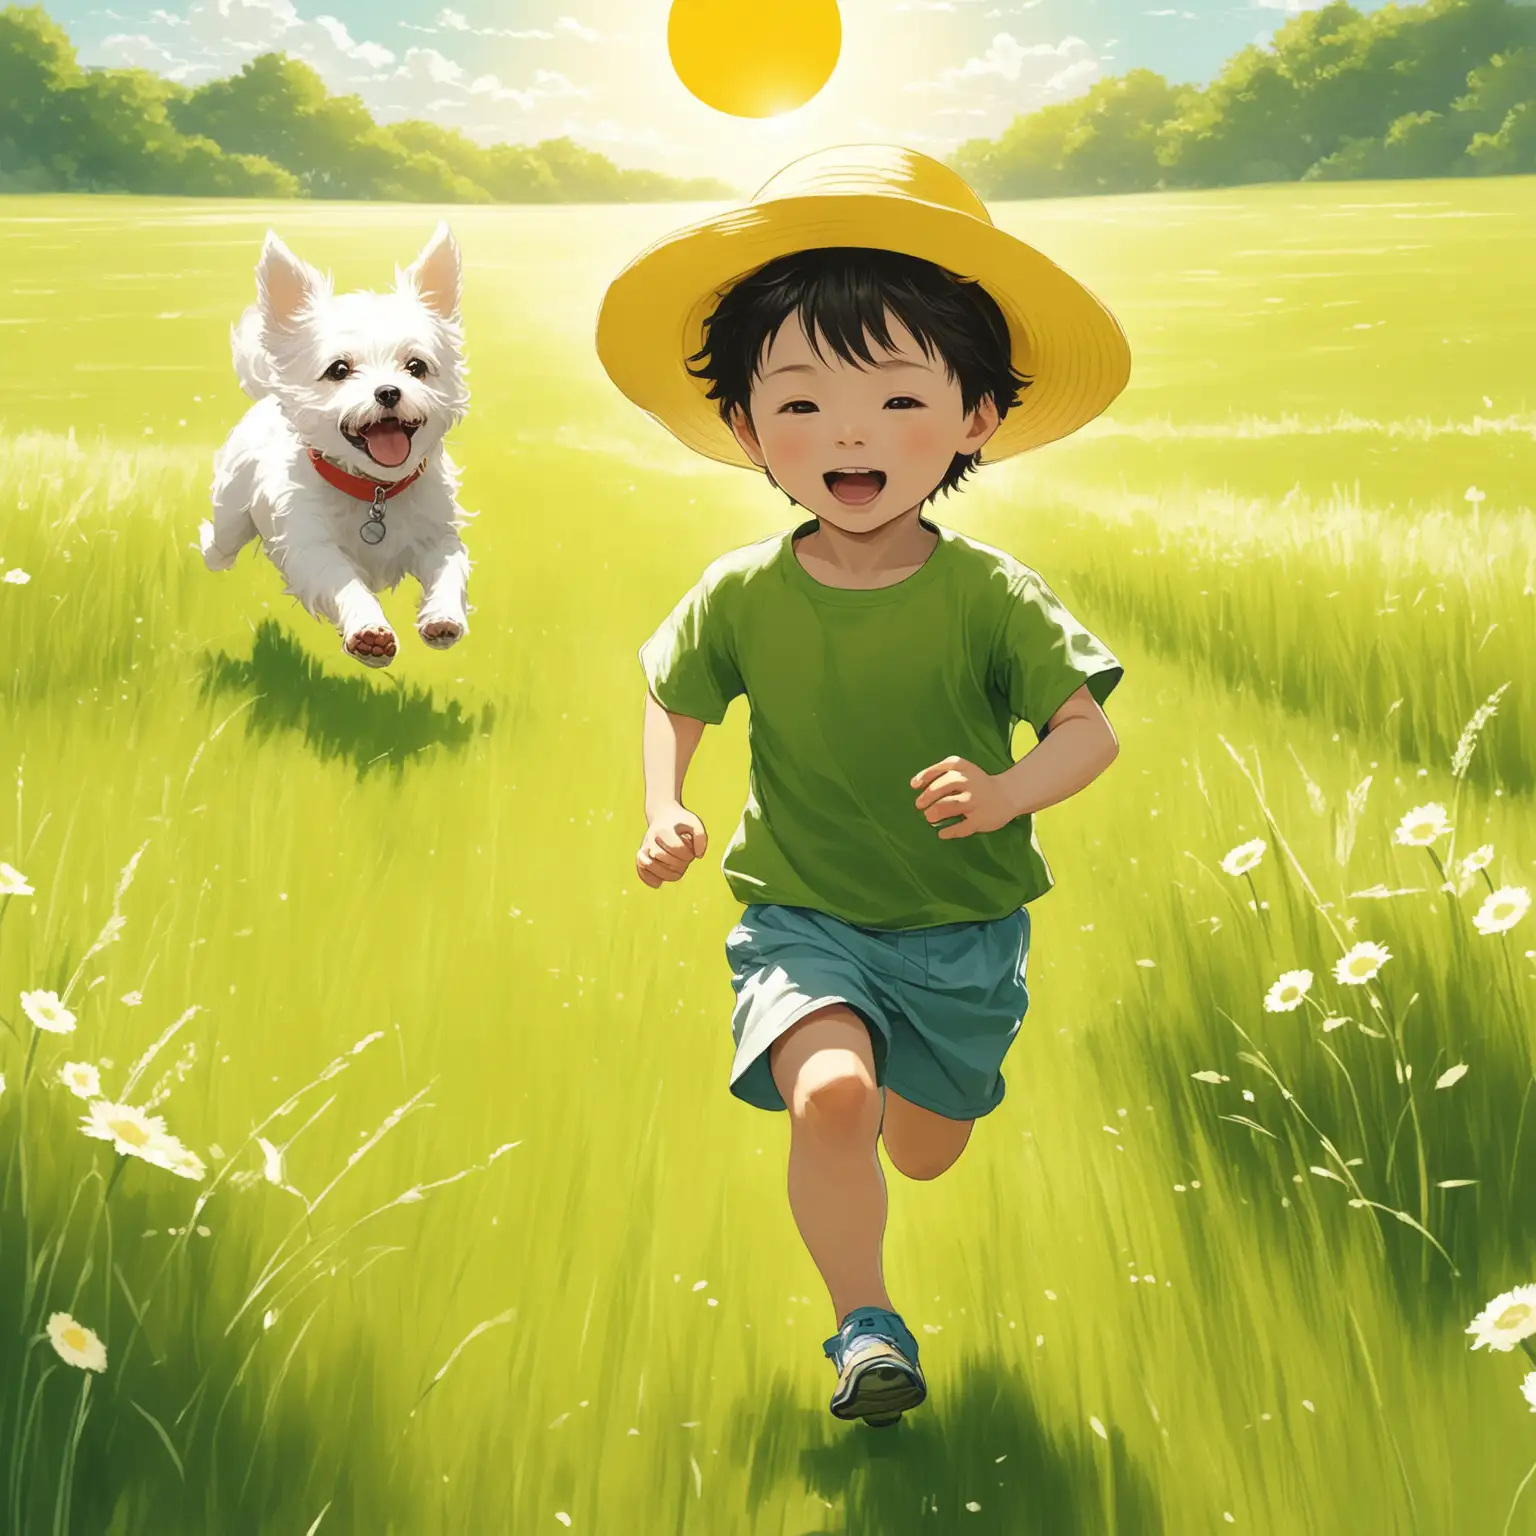 Young-Boy-with-Yellow-Sun-Hat-and-White-Dog-Playing-in-Green-Field